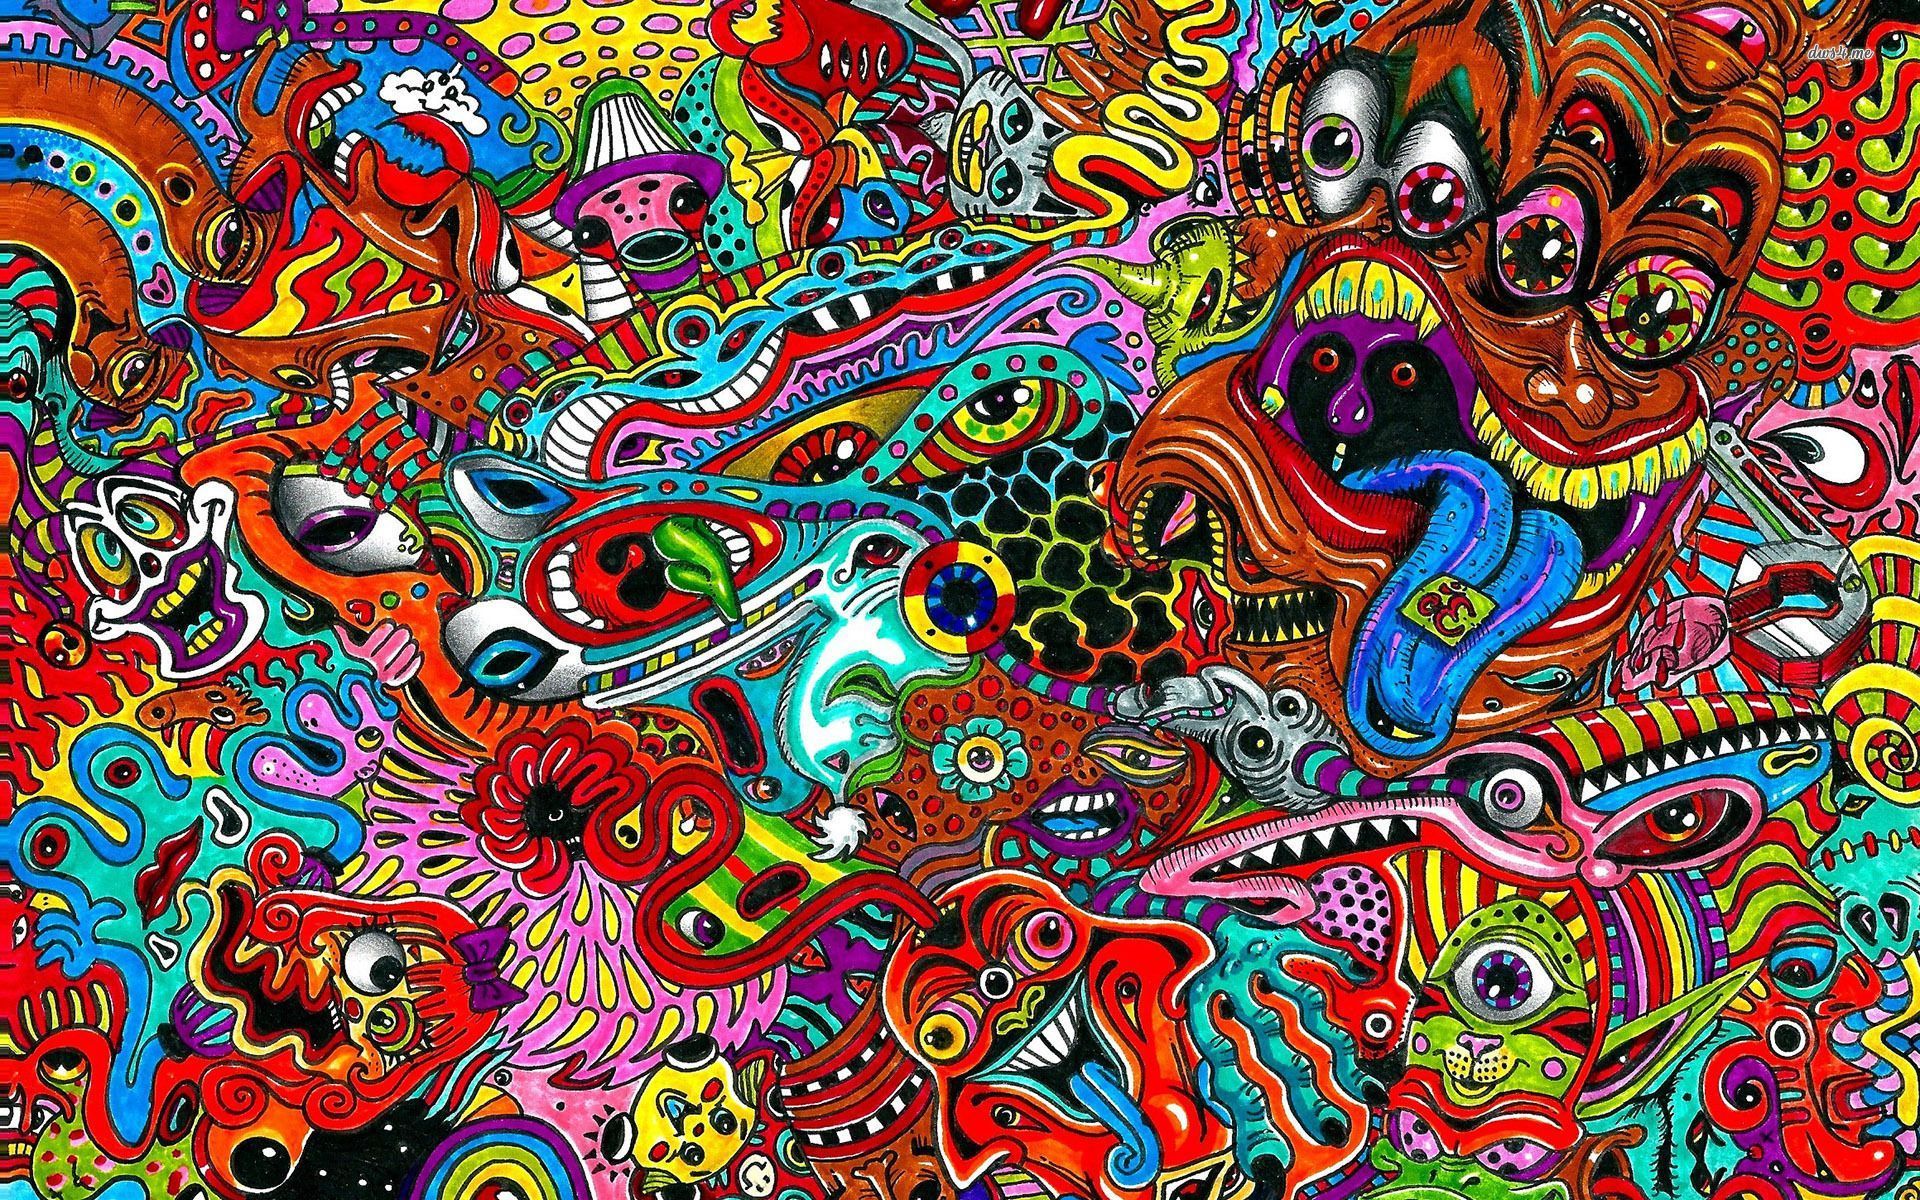 Psychedelic wallpaper - Artistic wallpapers -